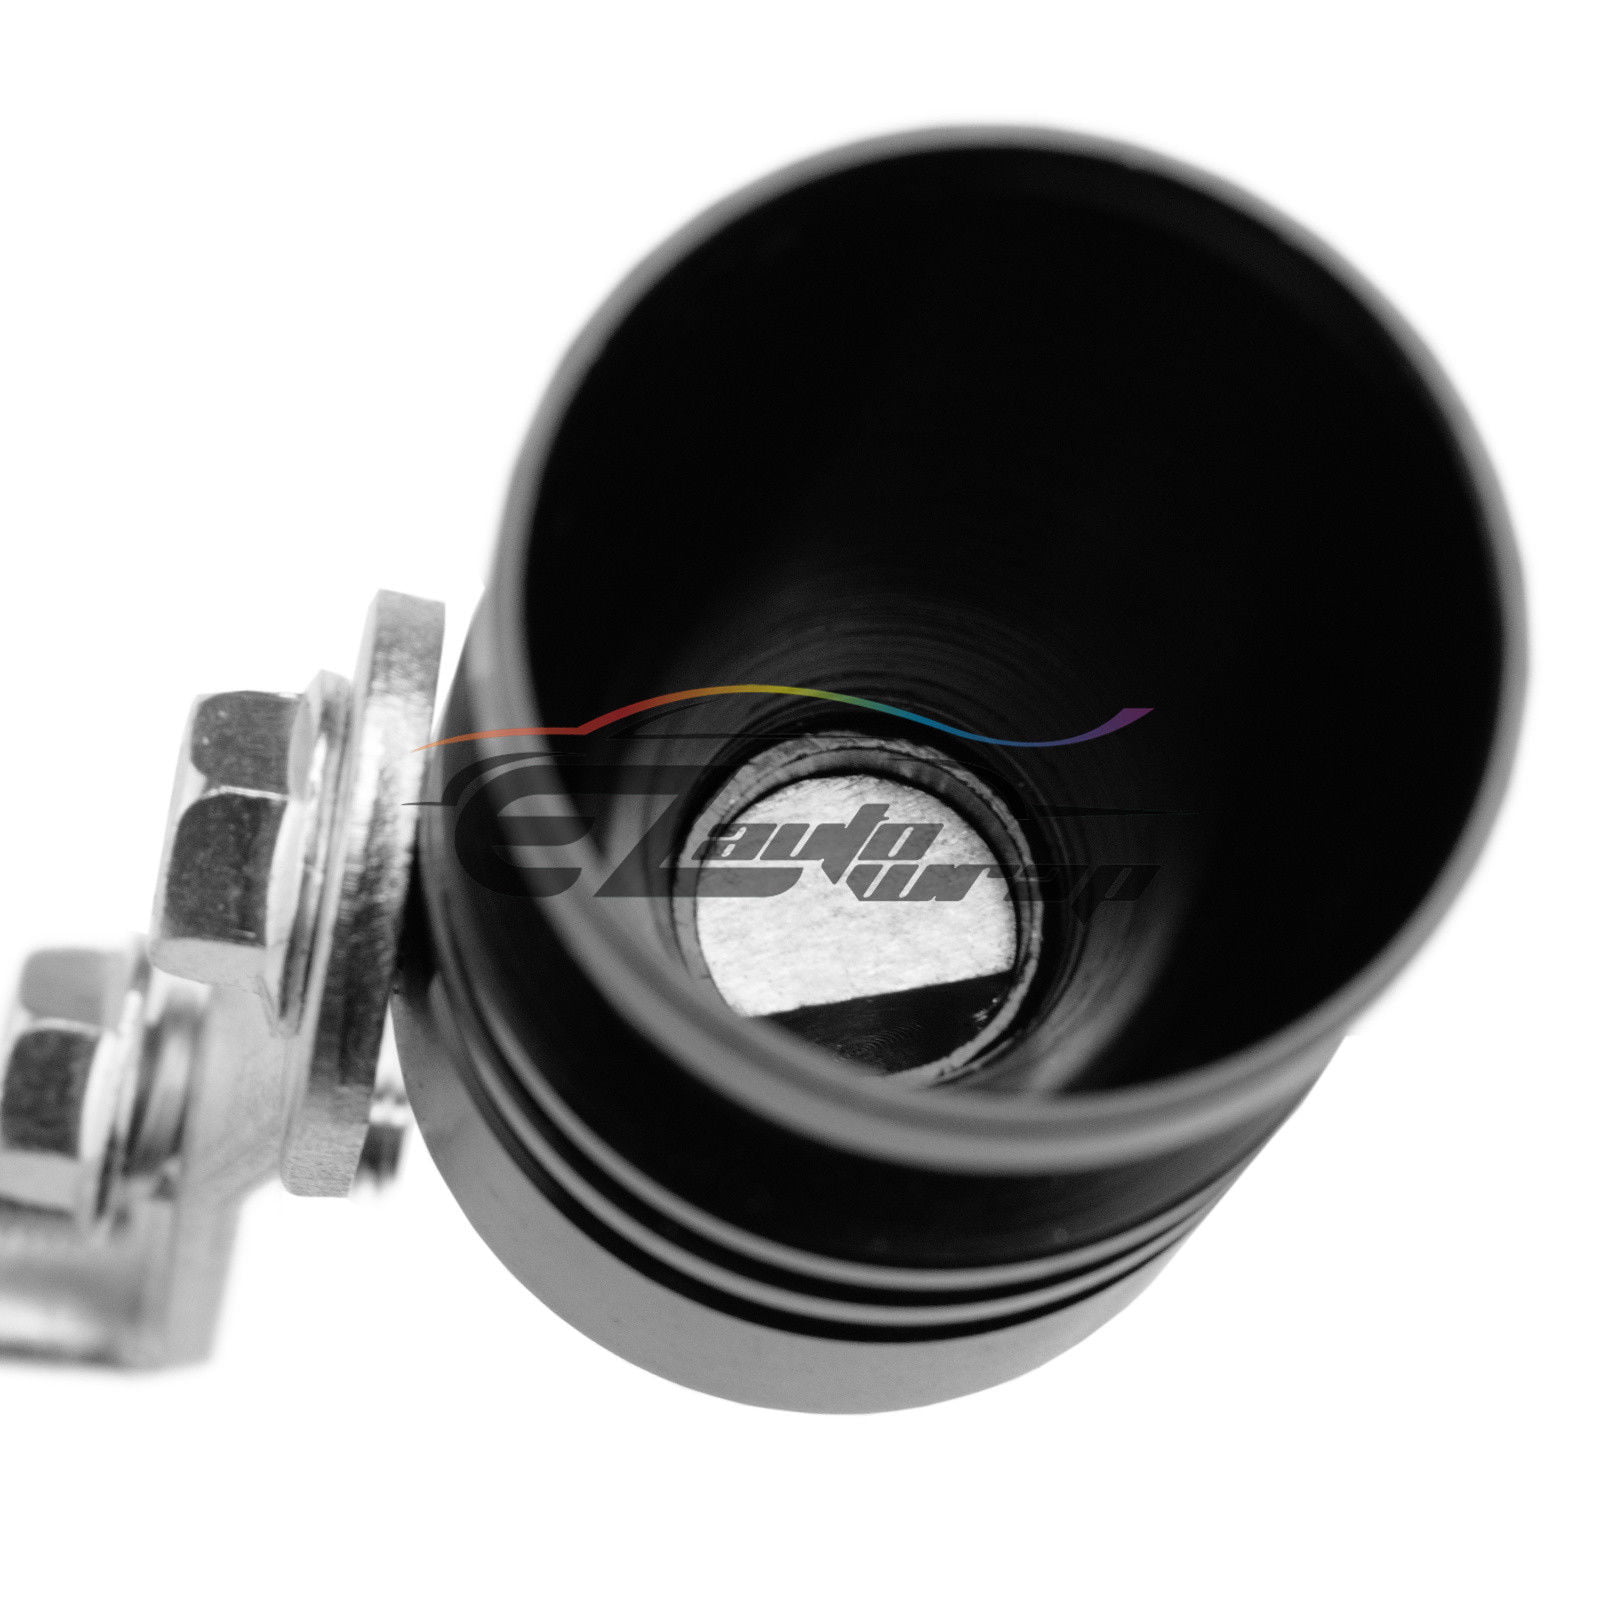 Universal Simulator Whistler Exhaust Turbo Whistle Pipe Sound Muffler Blow  Off Car Styling Tunning S M L XL - Price history & Review, AliExpress  Seller - KAYROKE Store